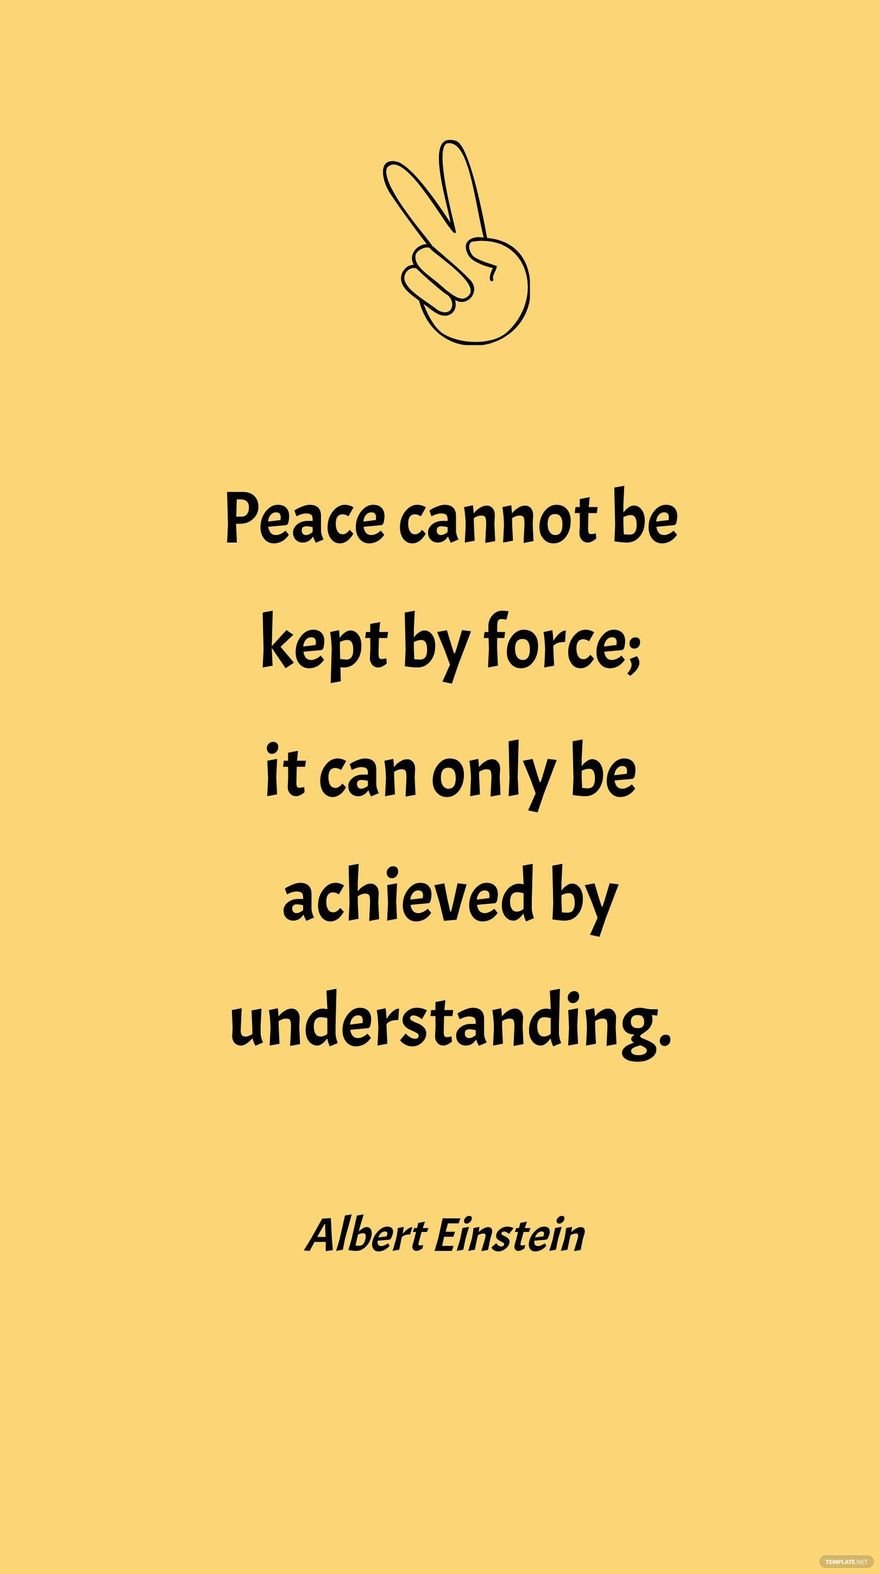 Albert Einstein - Peace cannot be kept by force; it can only be achieved by understanding.